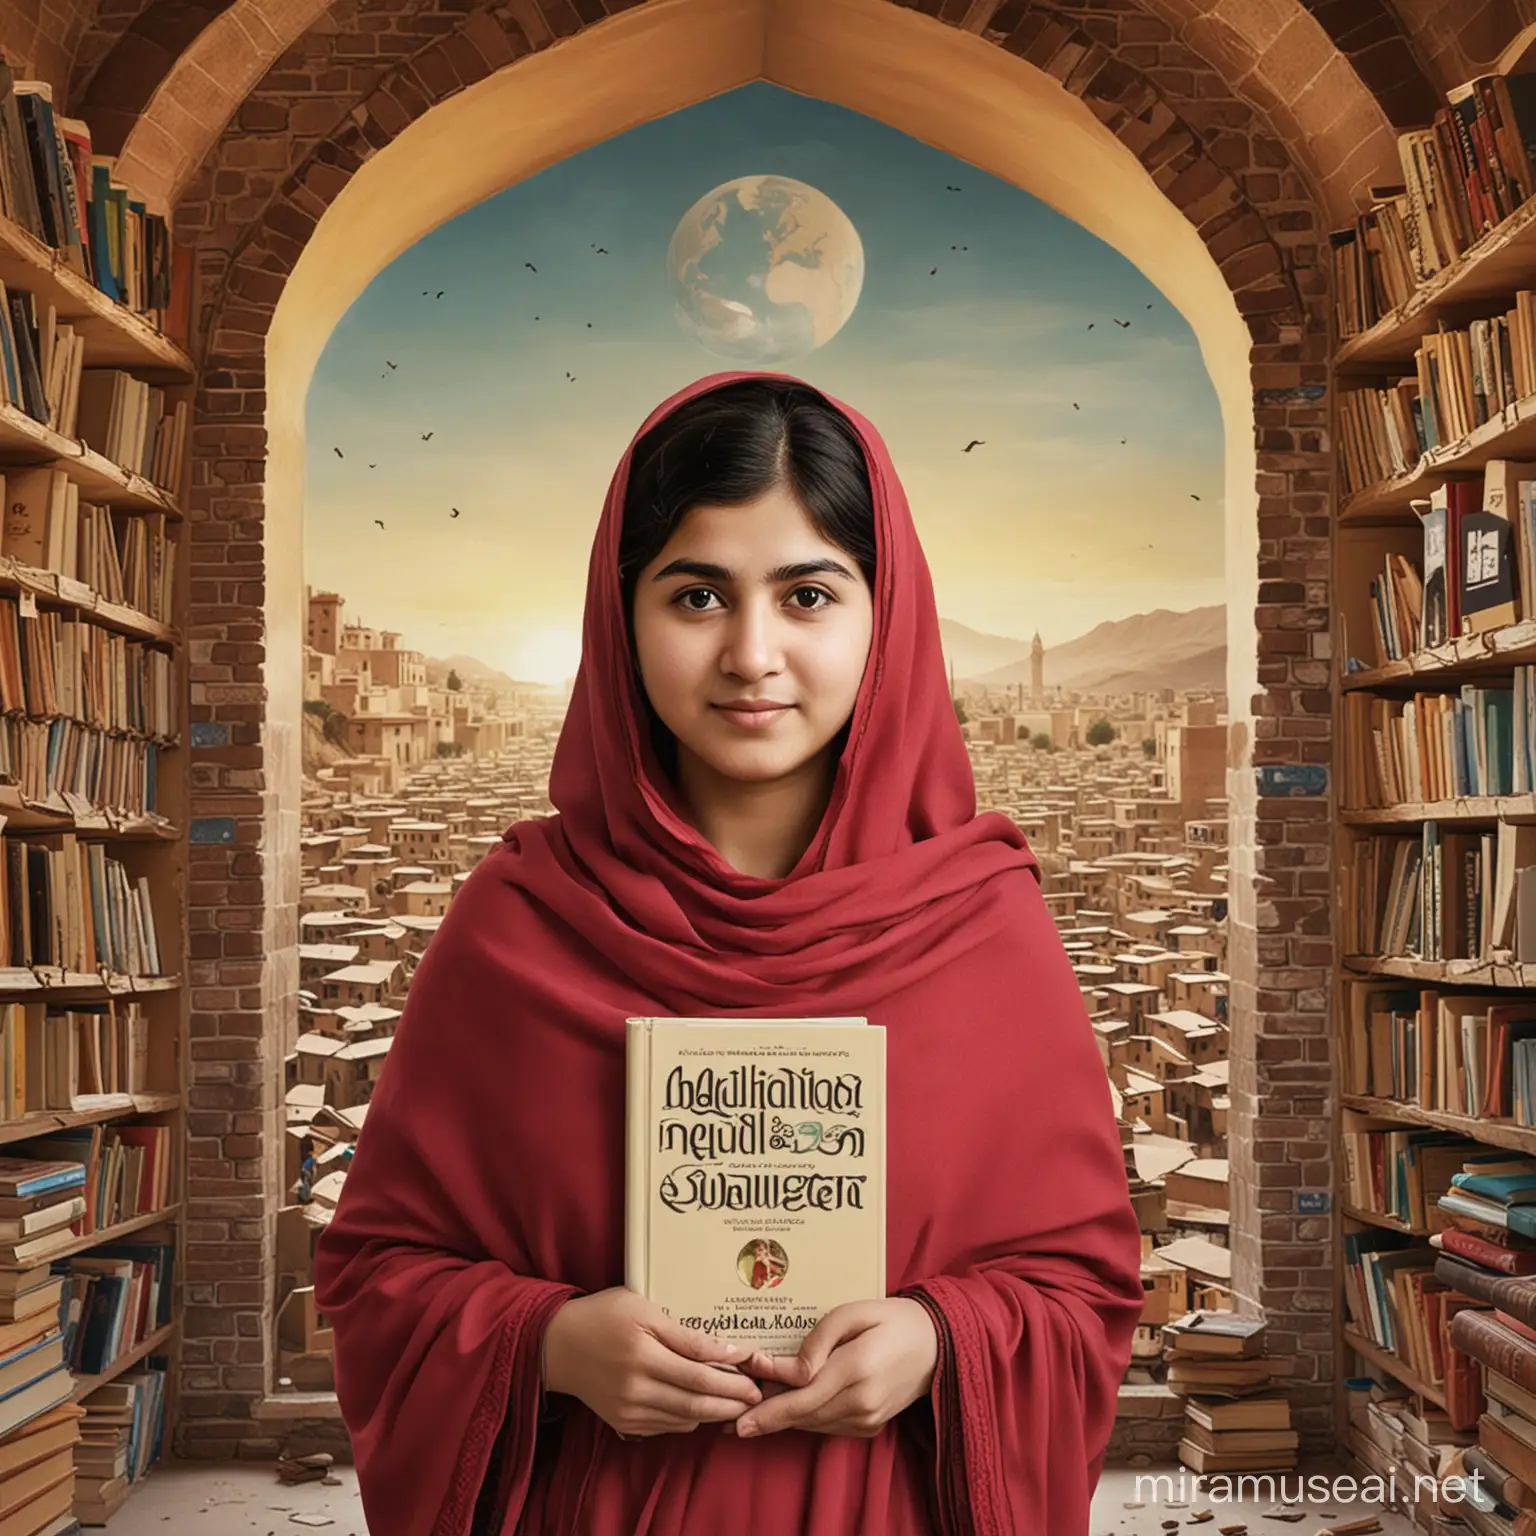 Image Prompt:

The image showcases Malala Yousafzai, a renowned advocate for education rights, standing confidently with a determined expression. She is holding a book in one hand, symbolizing the power of education and knowledge. Surrounding her are visuals representing the impact of her work, such as books, school buildings, and the logo of the Malala Fund. The image exudes a sense of strength, resilience, and empowerment, reflecting Malala's unwavering commitment to promoting education for all. It serves as a reminder of her inspiring journey and the transformative influence she has had on the world. The image encourages viewers to recognize the importance of education and the potential for positive change when individuals stand up for the rights of others.